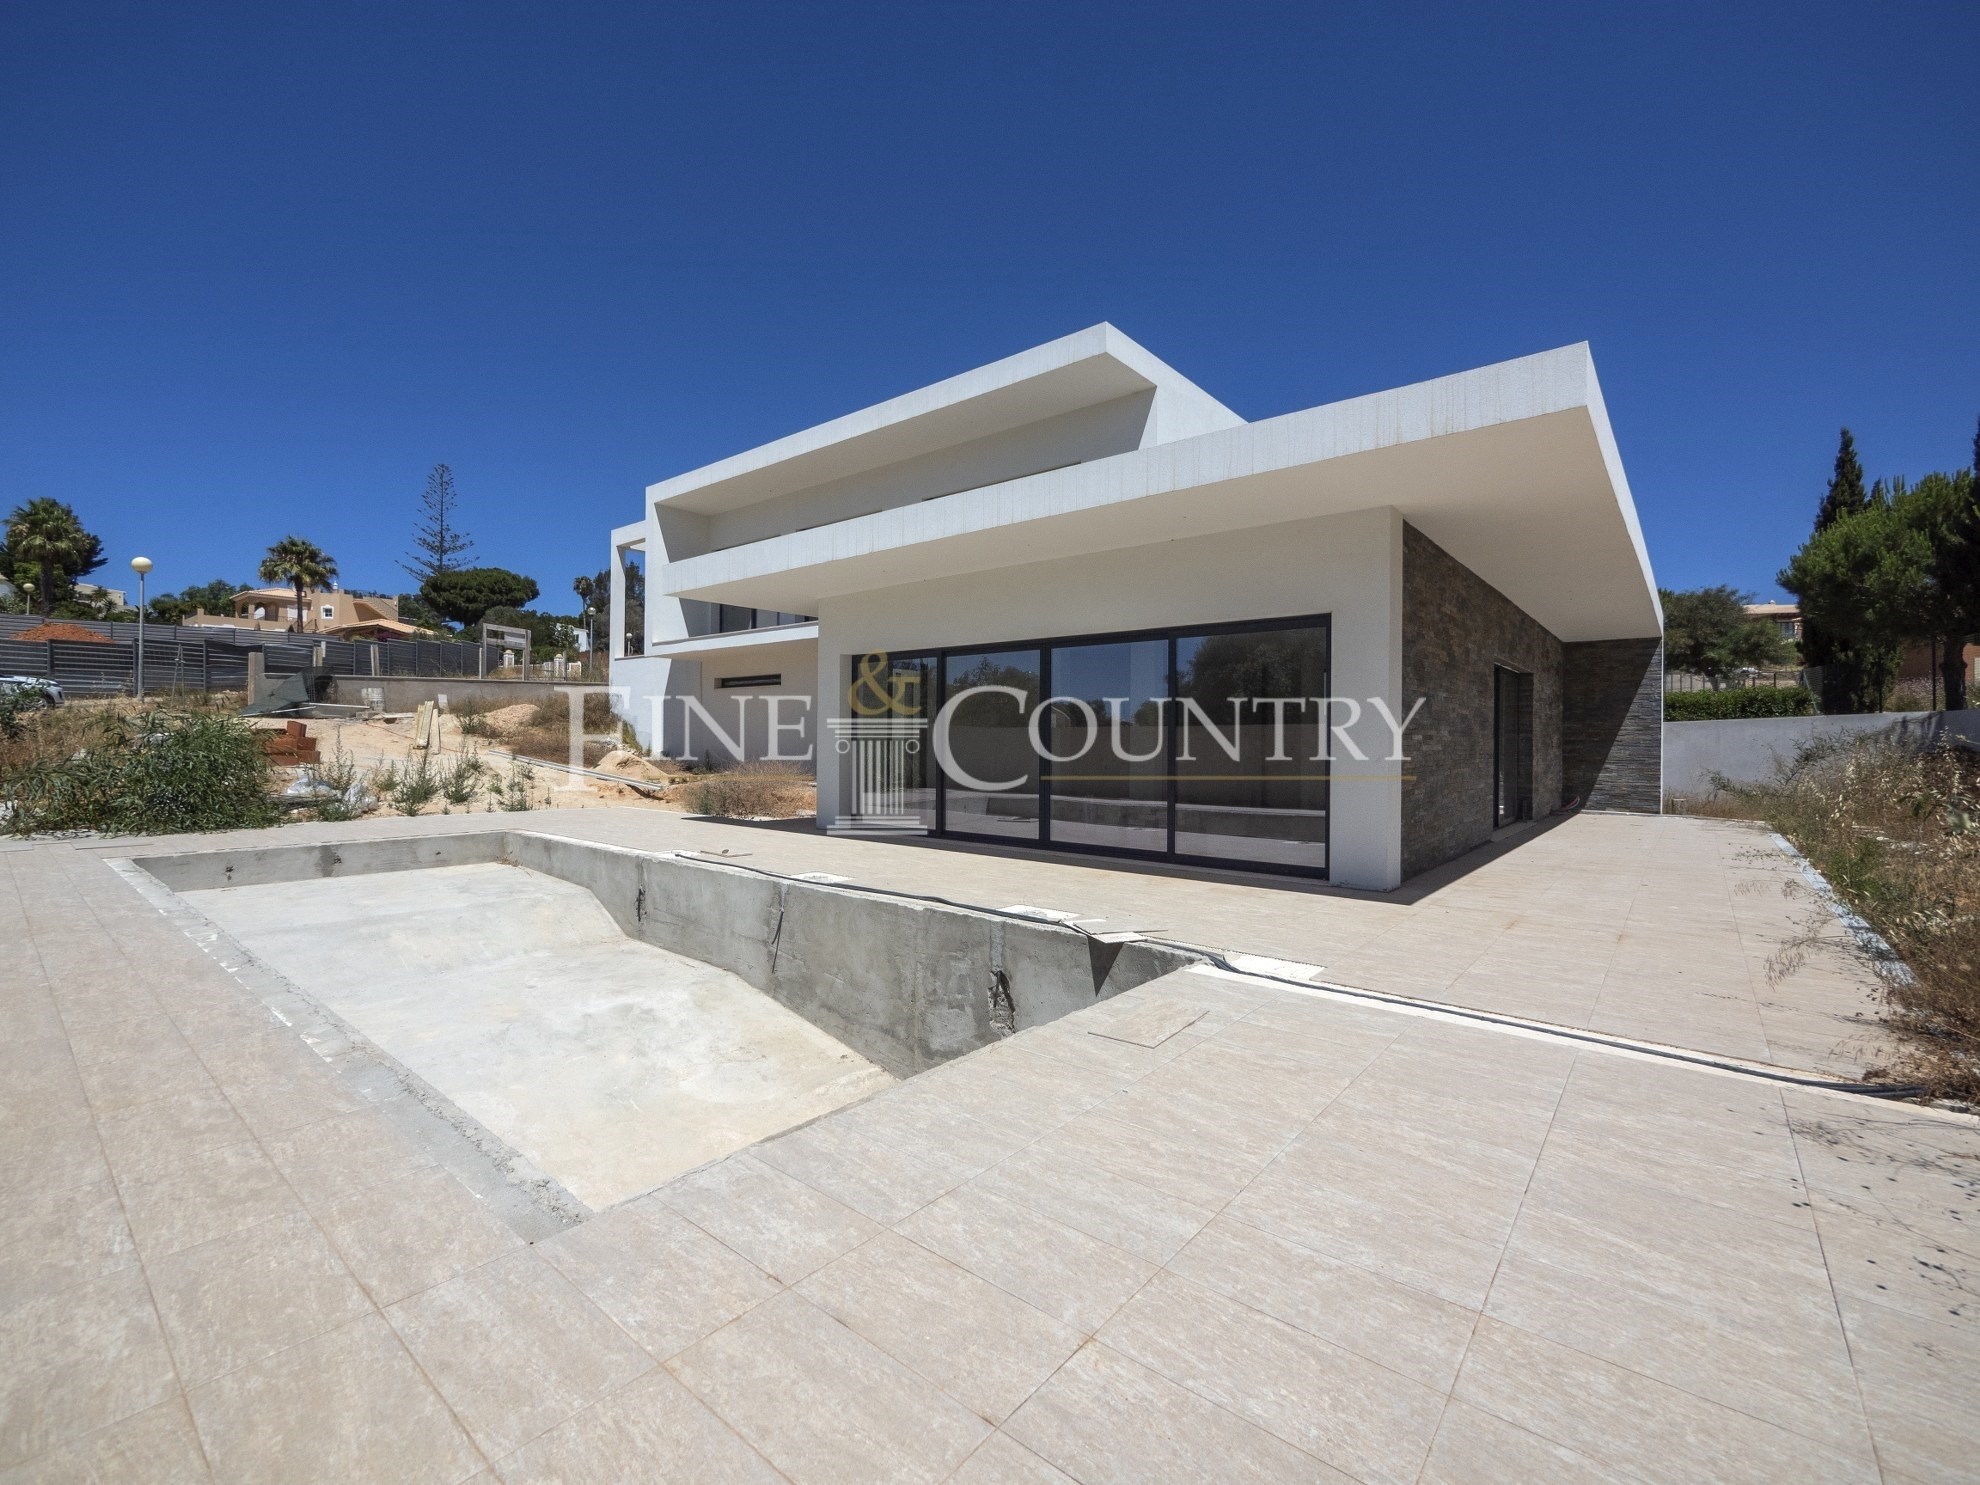 Carvoeiro – 3 + 1 bedrooms contemporary villa with pool, garage and roof terrace Accommodation in Lagoa